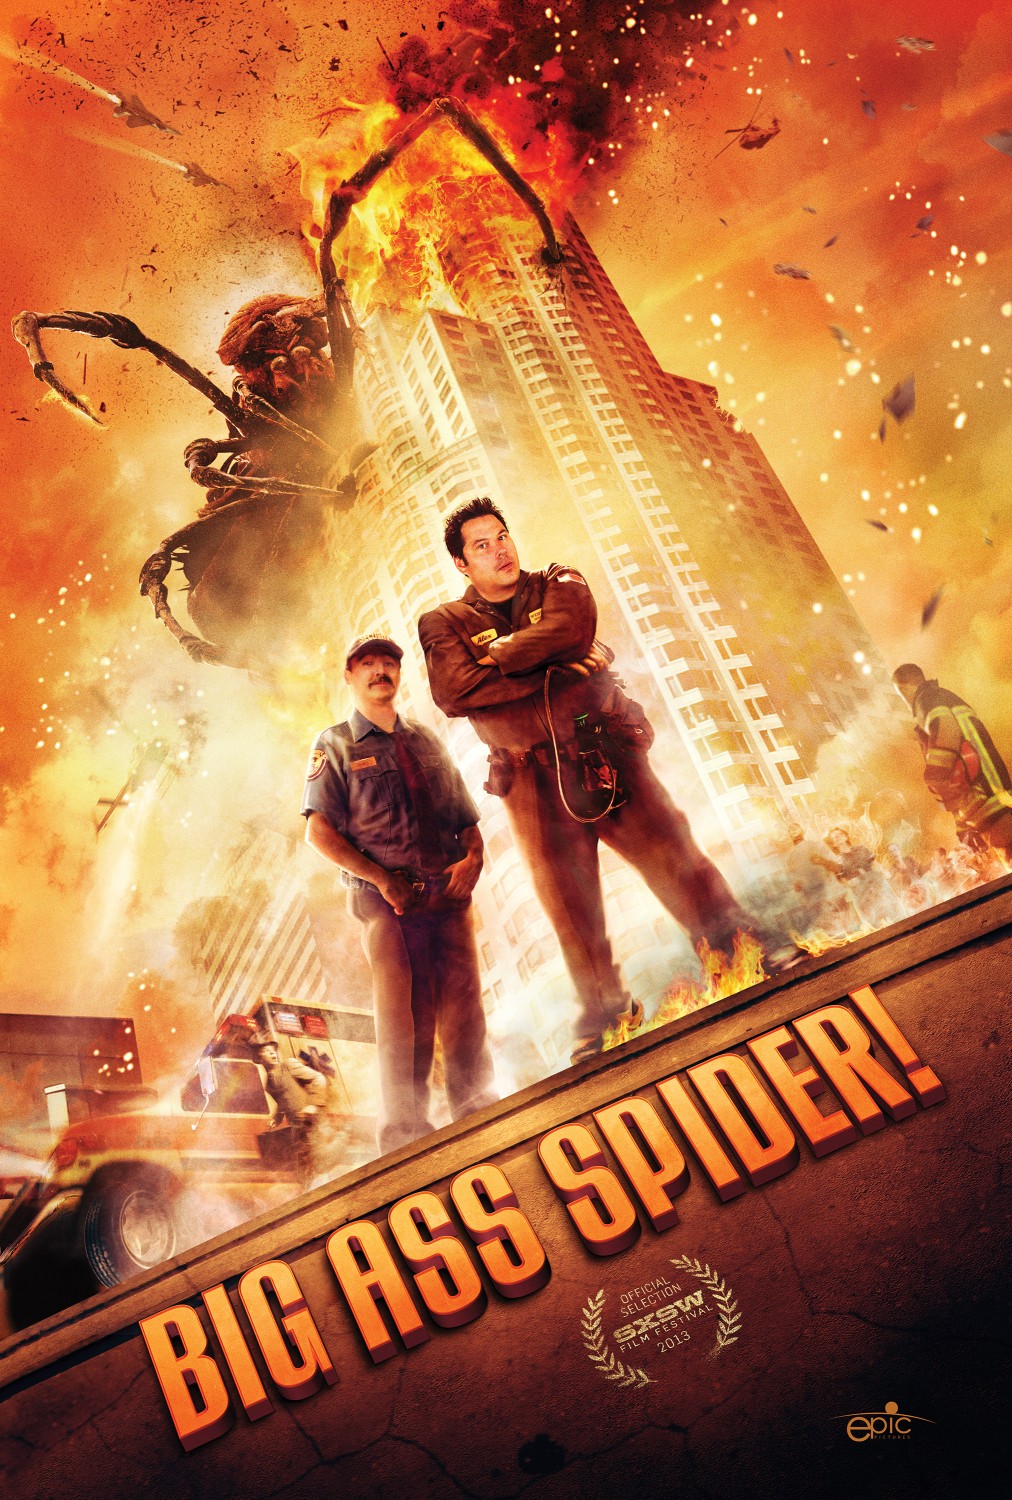 Extra Large Movie Poster Image for Big Ass Spider 